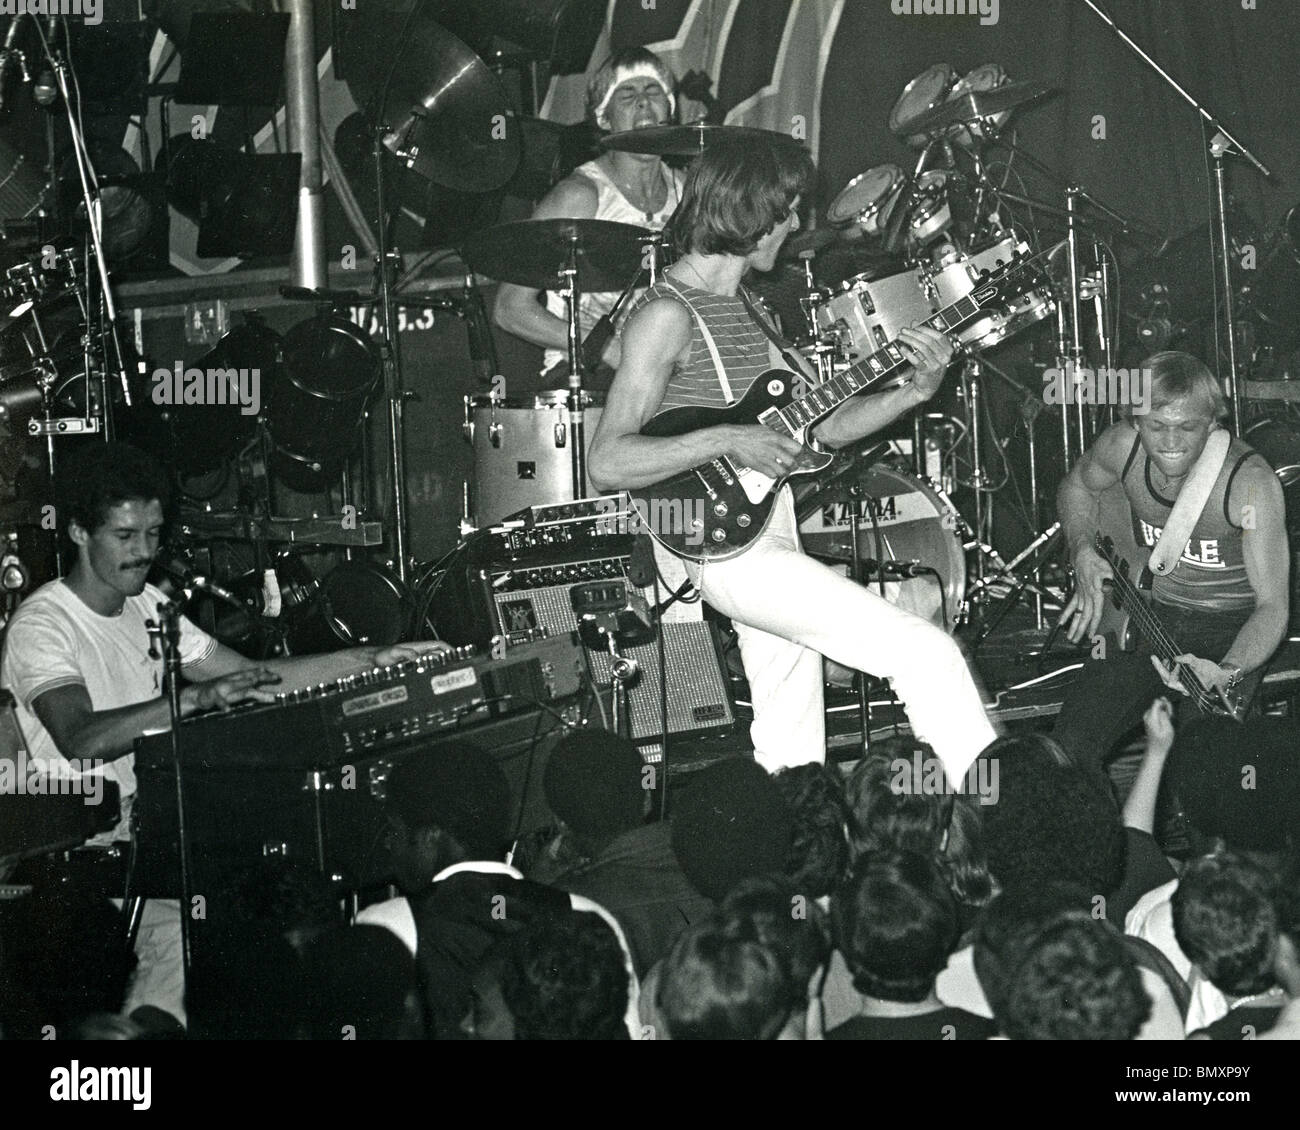 LEVEL 42 UK group at Rock City, Nottingham, August 1982 with Mark King at right. Photo Robin Ridley Stock Photo